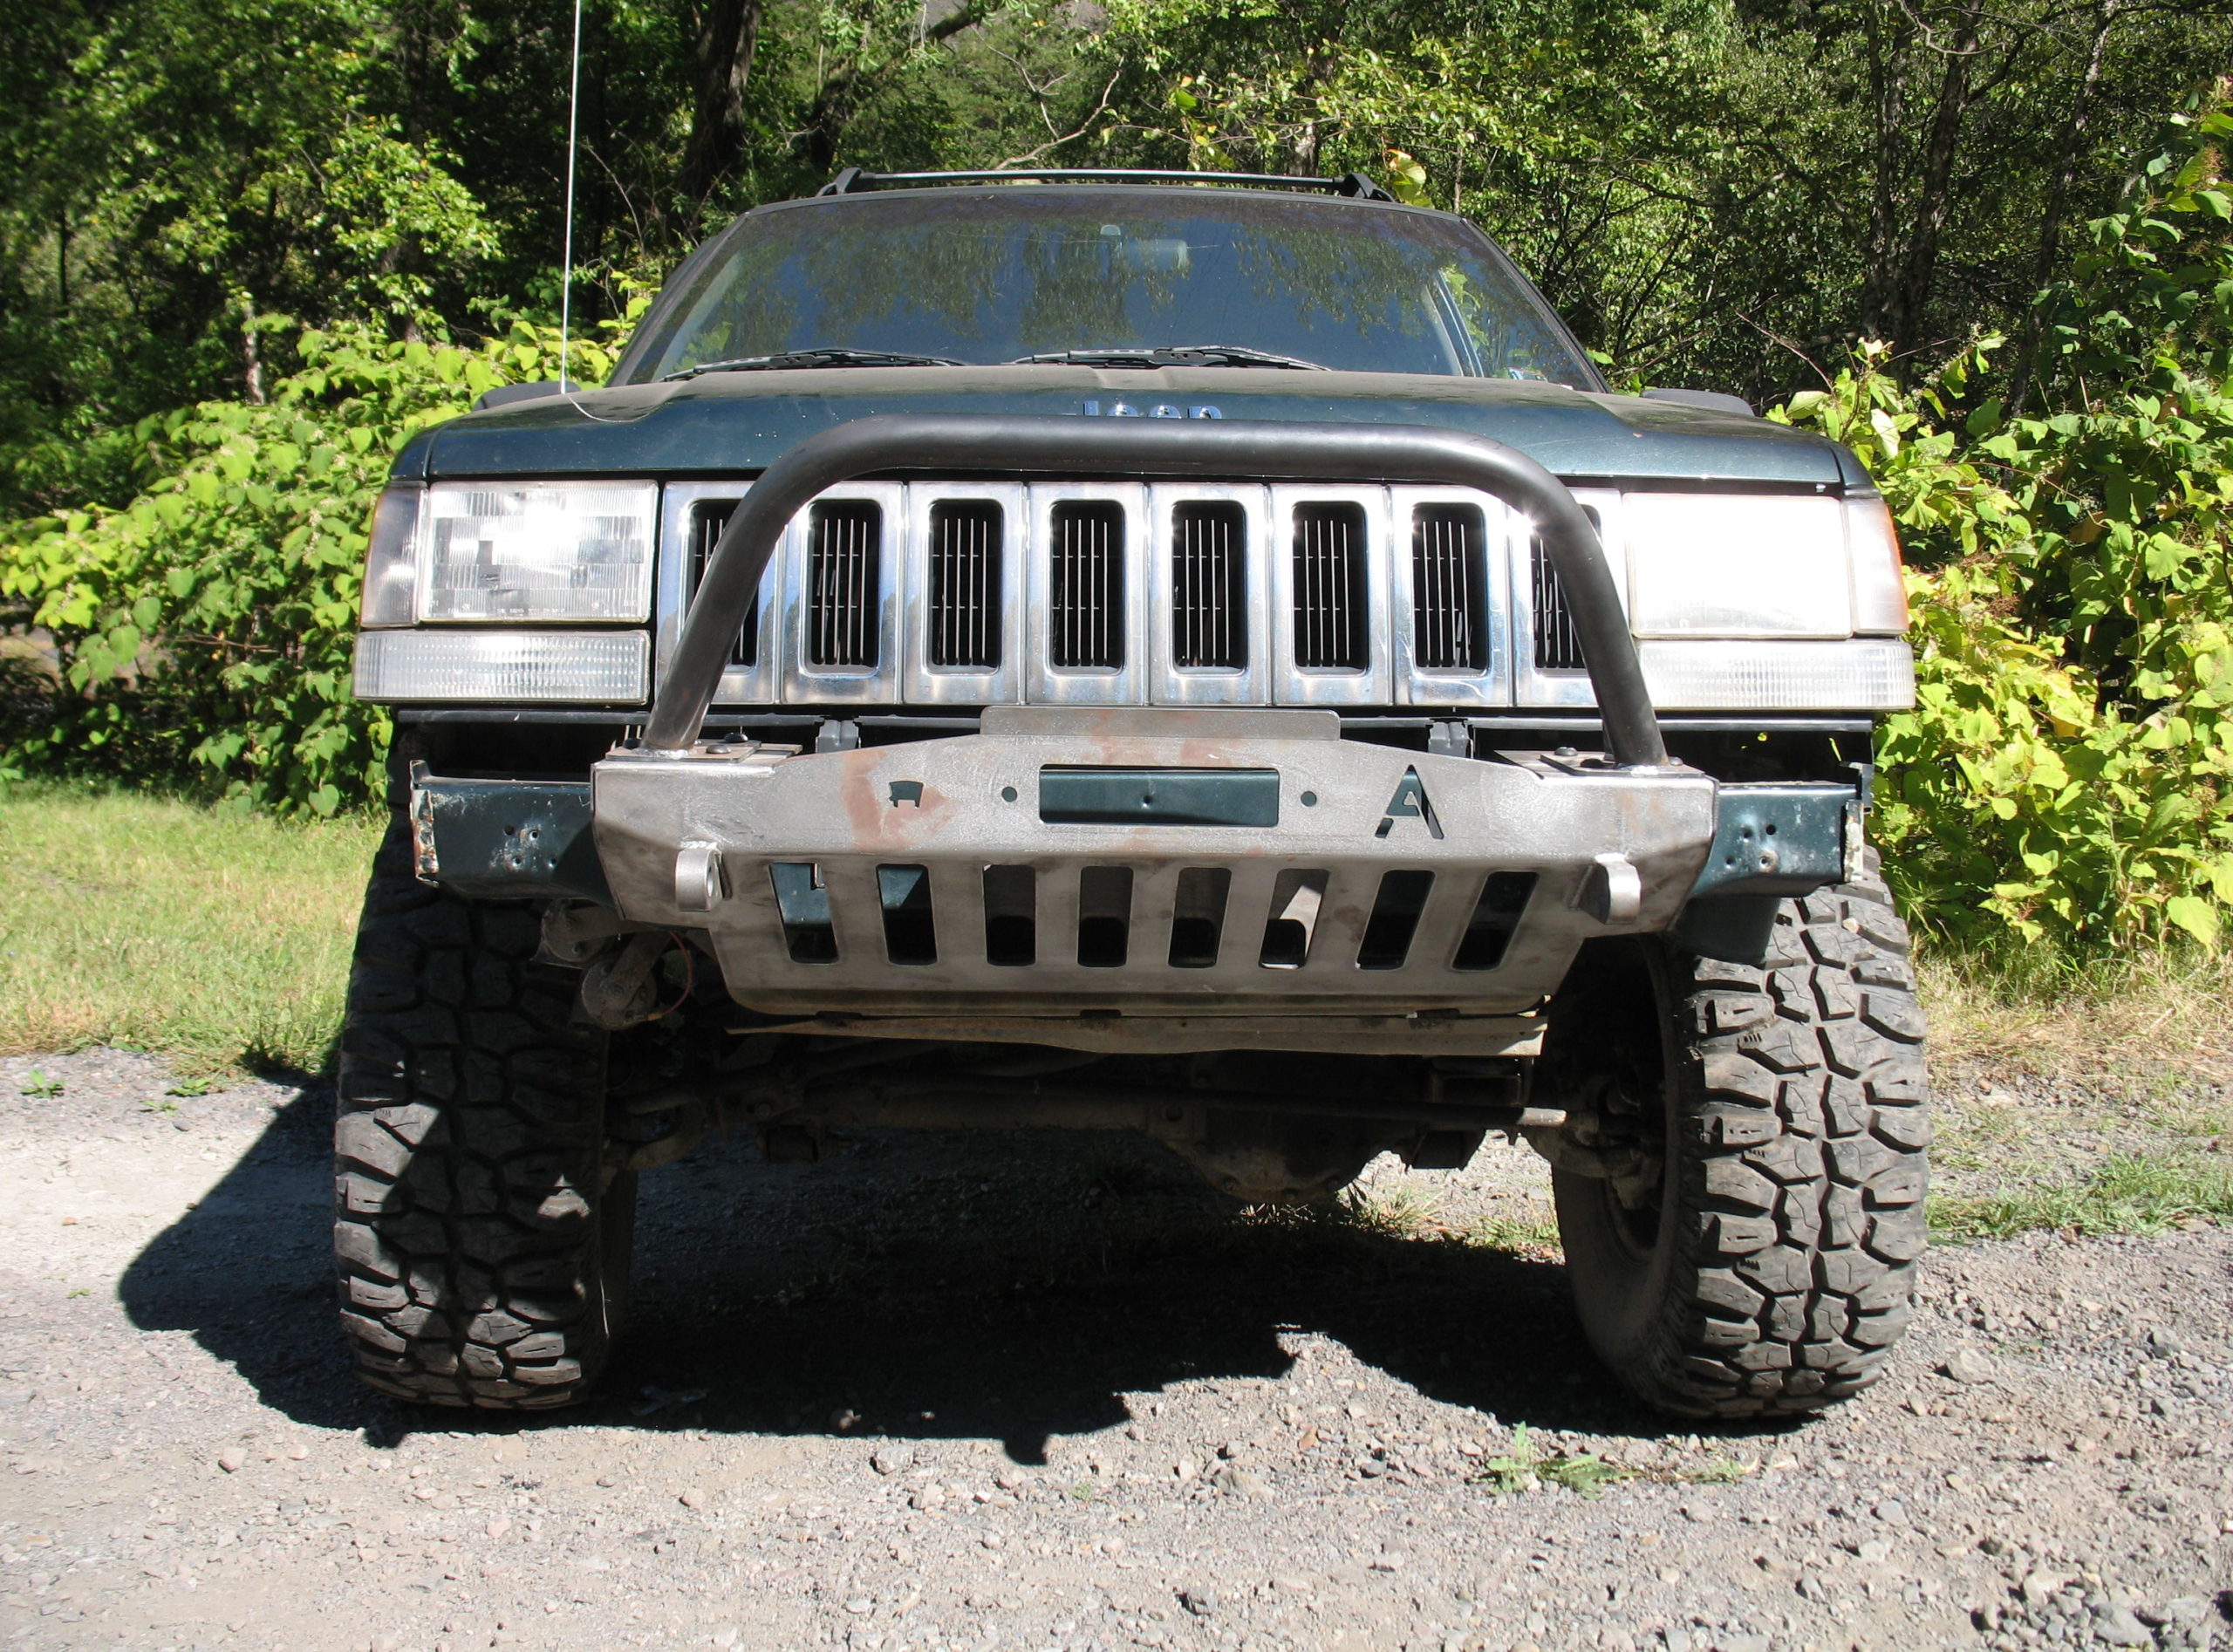 Elite Jeep Grand Cherokee ZJ Modular Shorty Plain Front Winch Bumper  ('93-'98) - Affordable Offroad